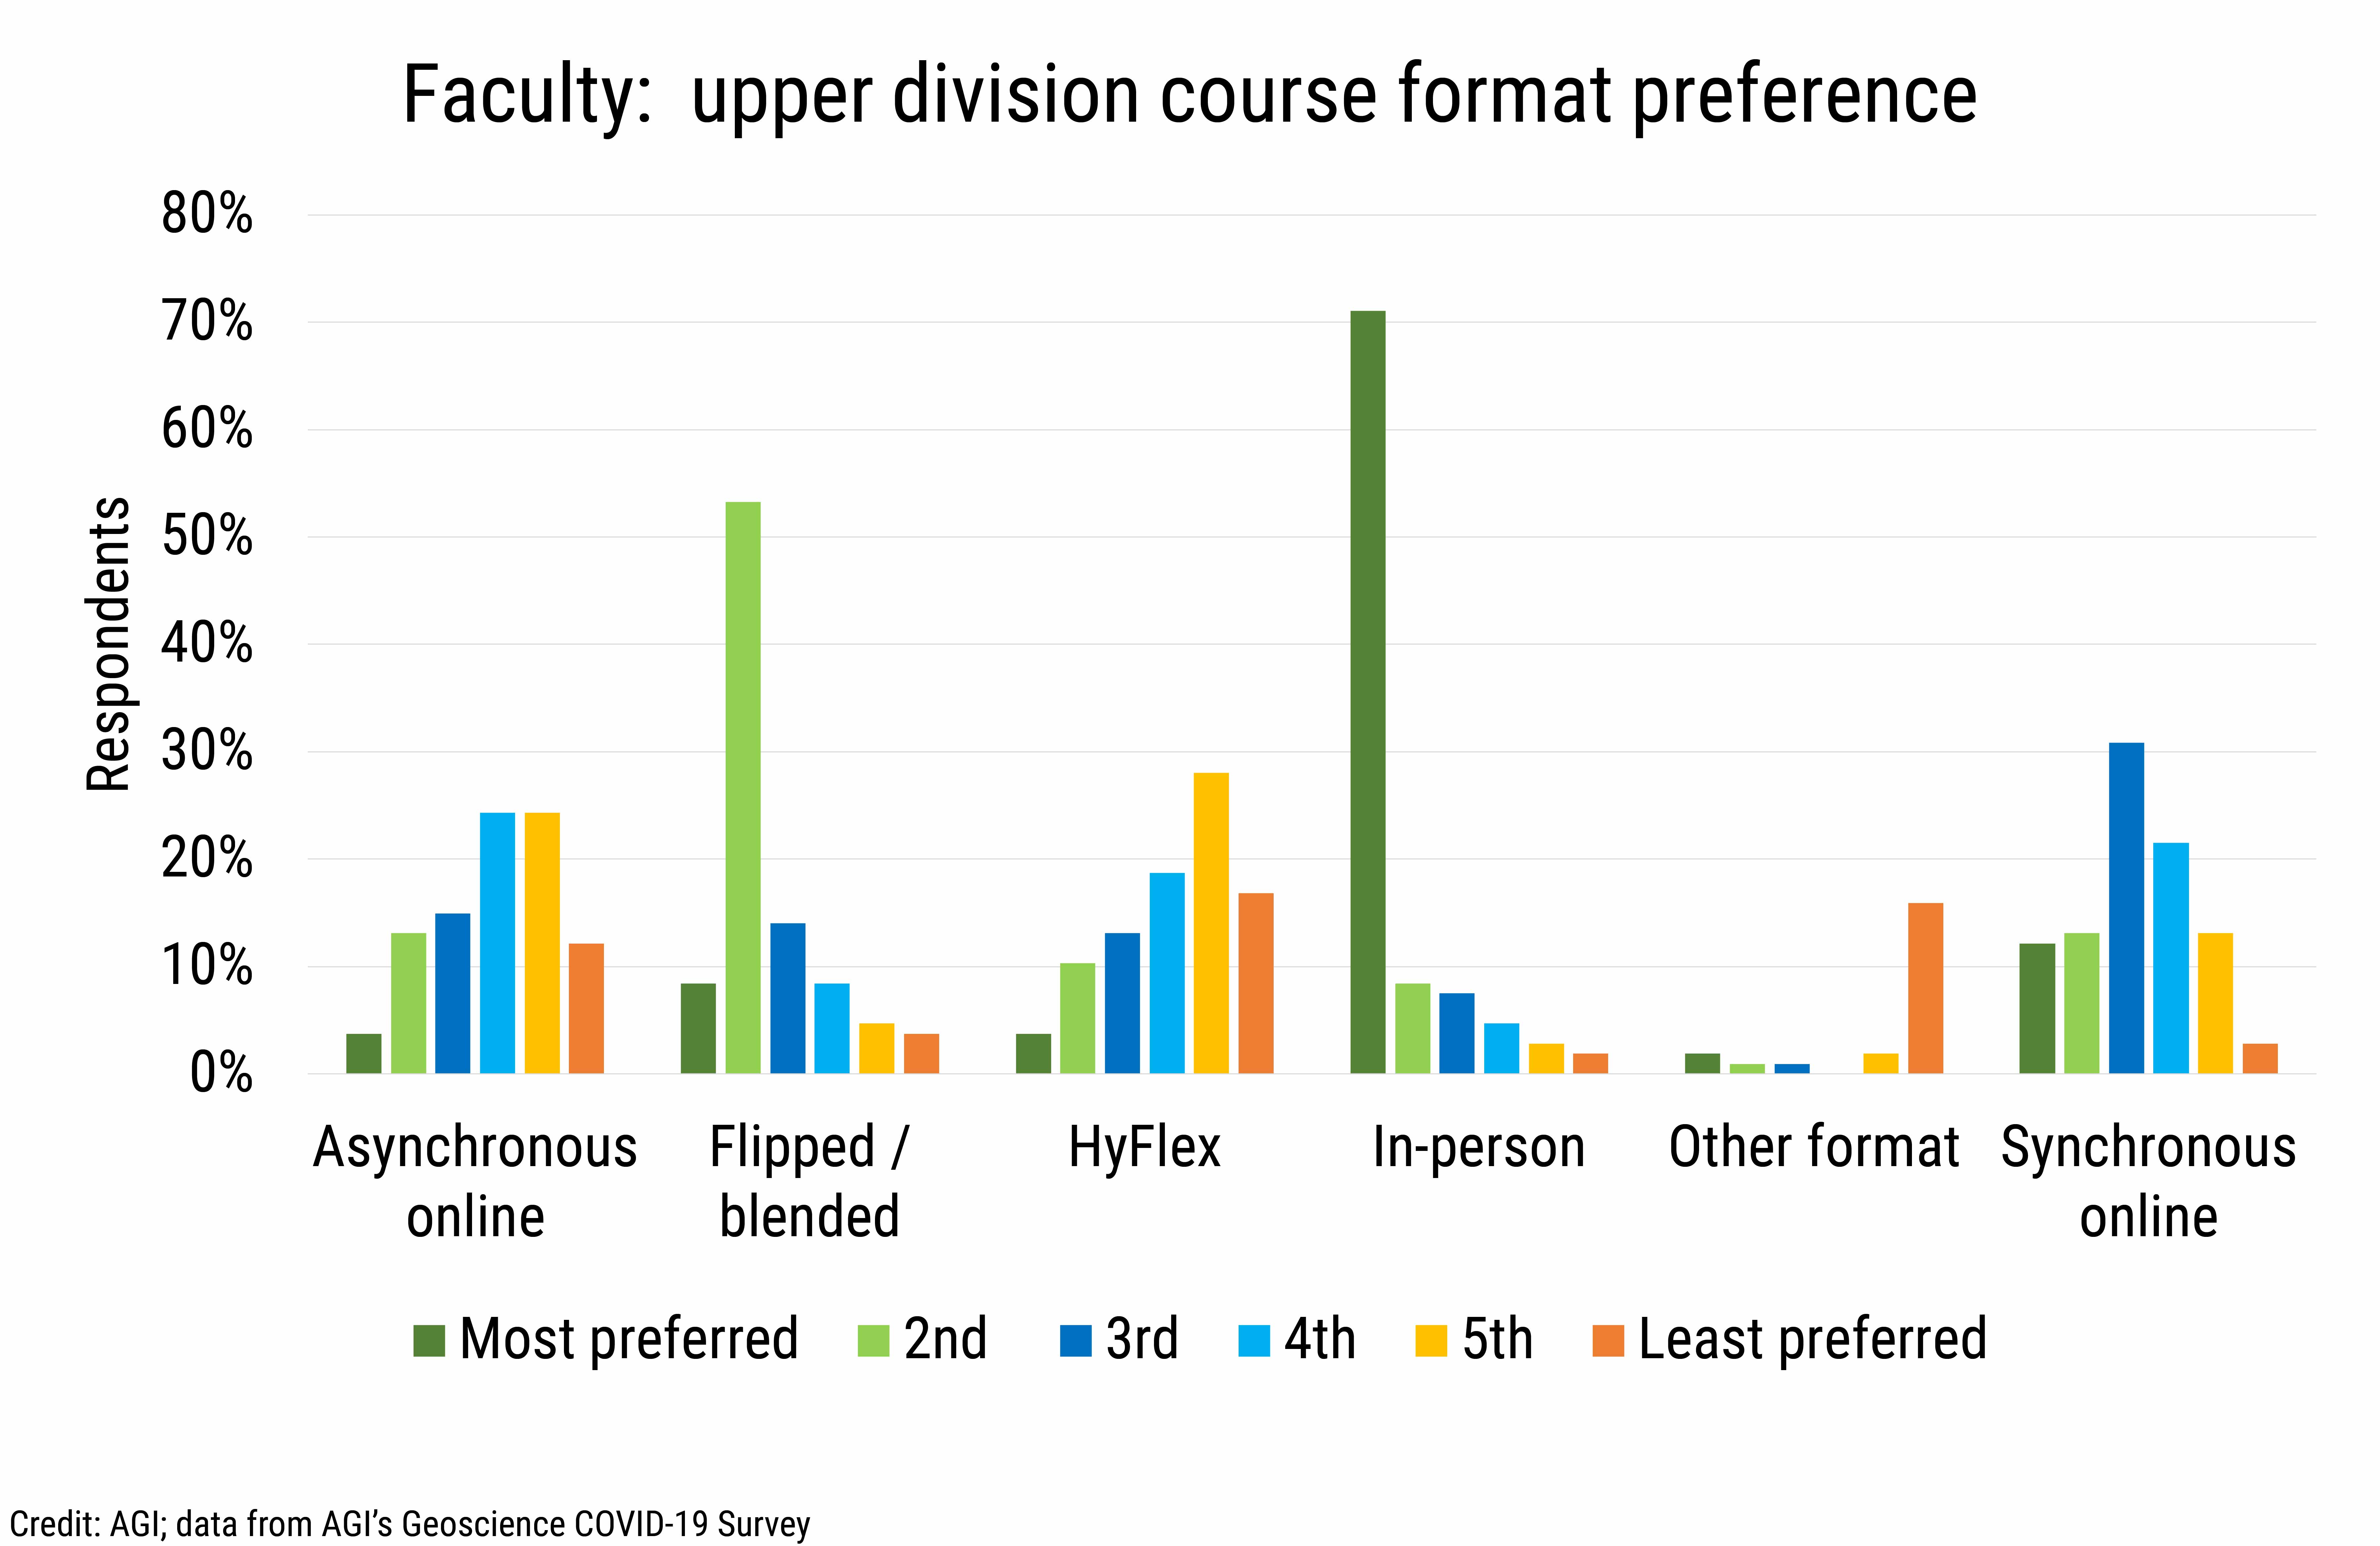 DB_2020-031 chart04 Faculty upper division course format preference (Credit: AGI; data from AGI's Geoscience COVID-19 Survey)